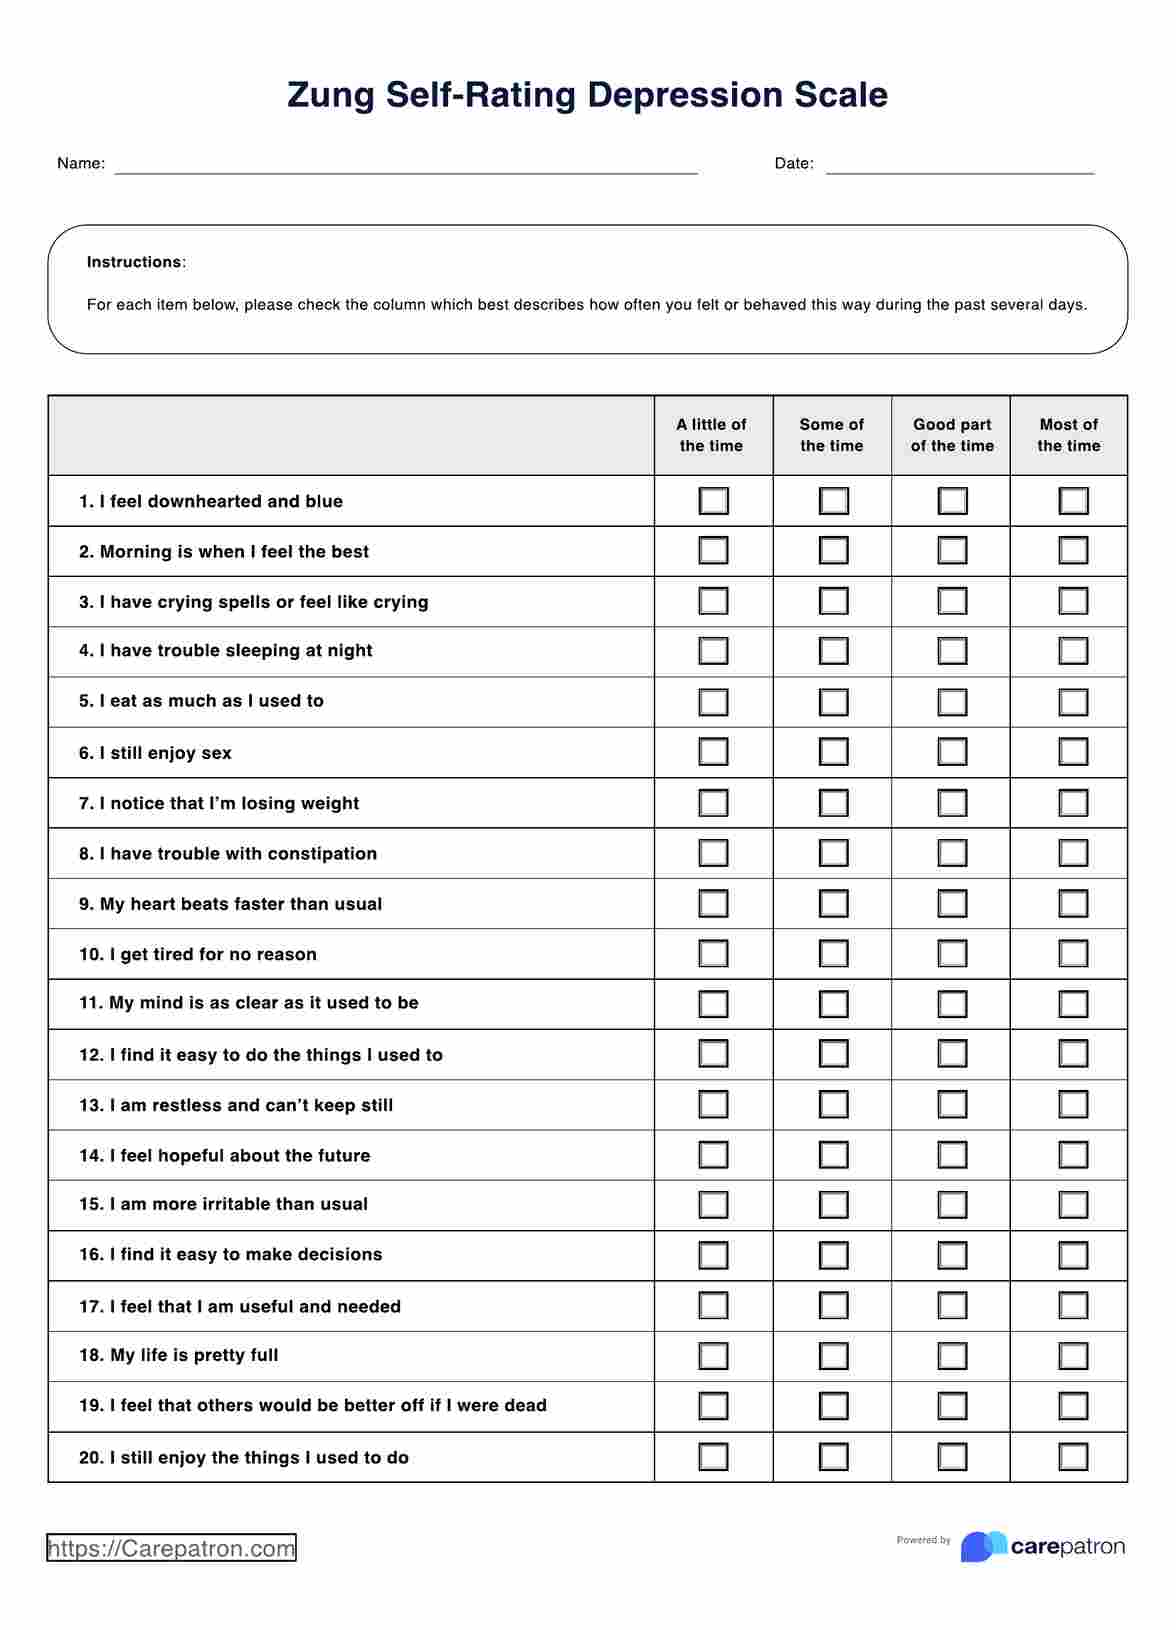 Zung Self-Rating Depression Scale PDF Example